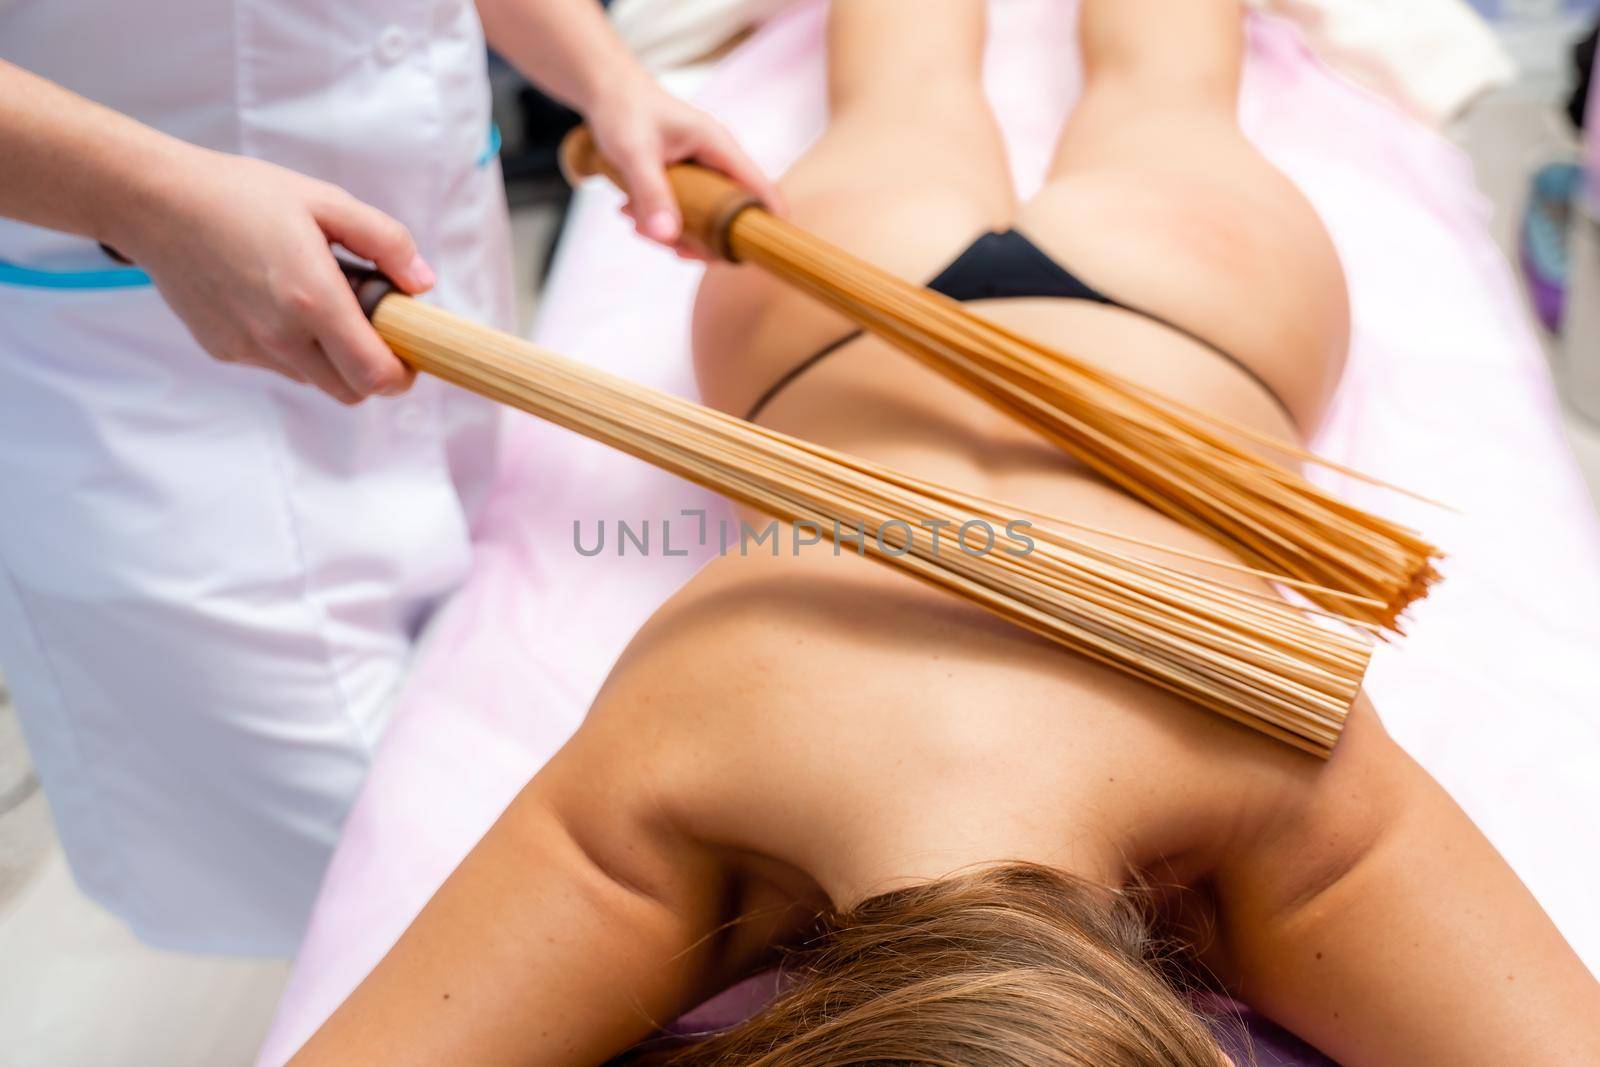 Woman masseuse doing double samurai massage with bamboo brooms in spa. Relaxing massage concept.